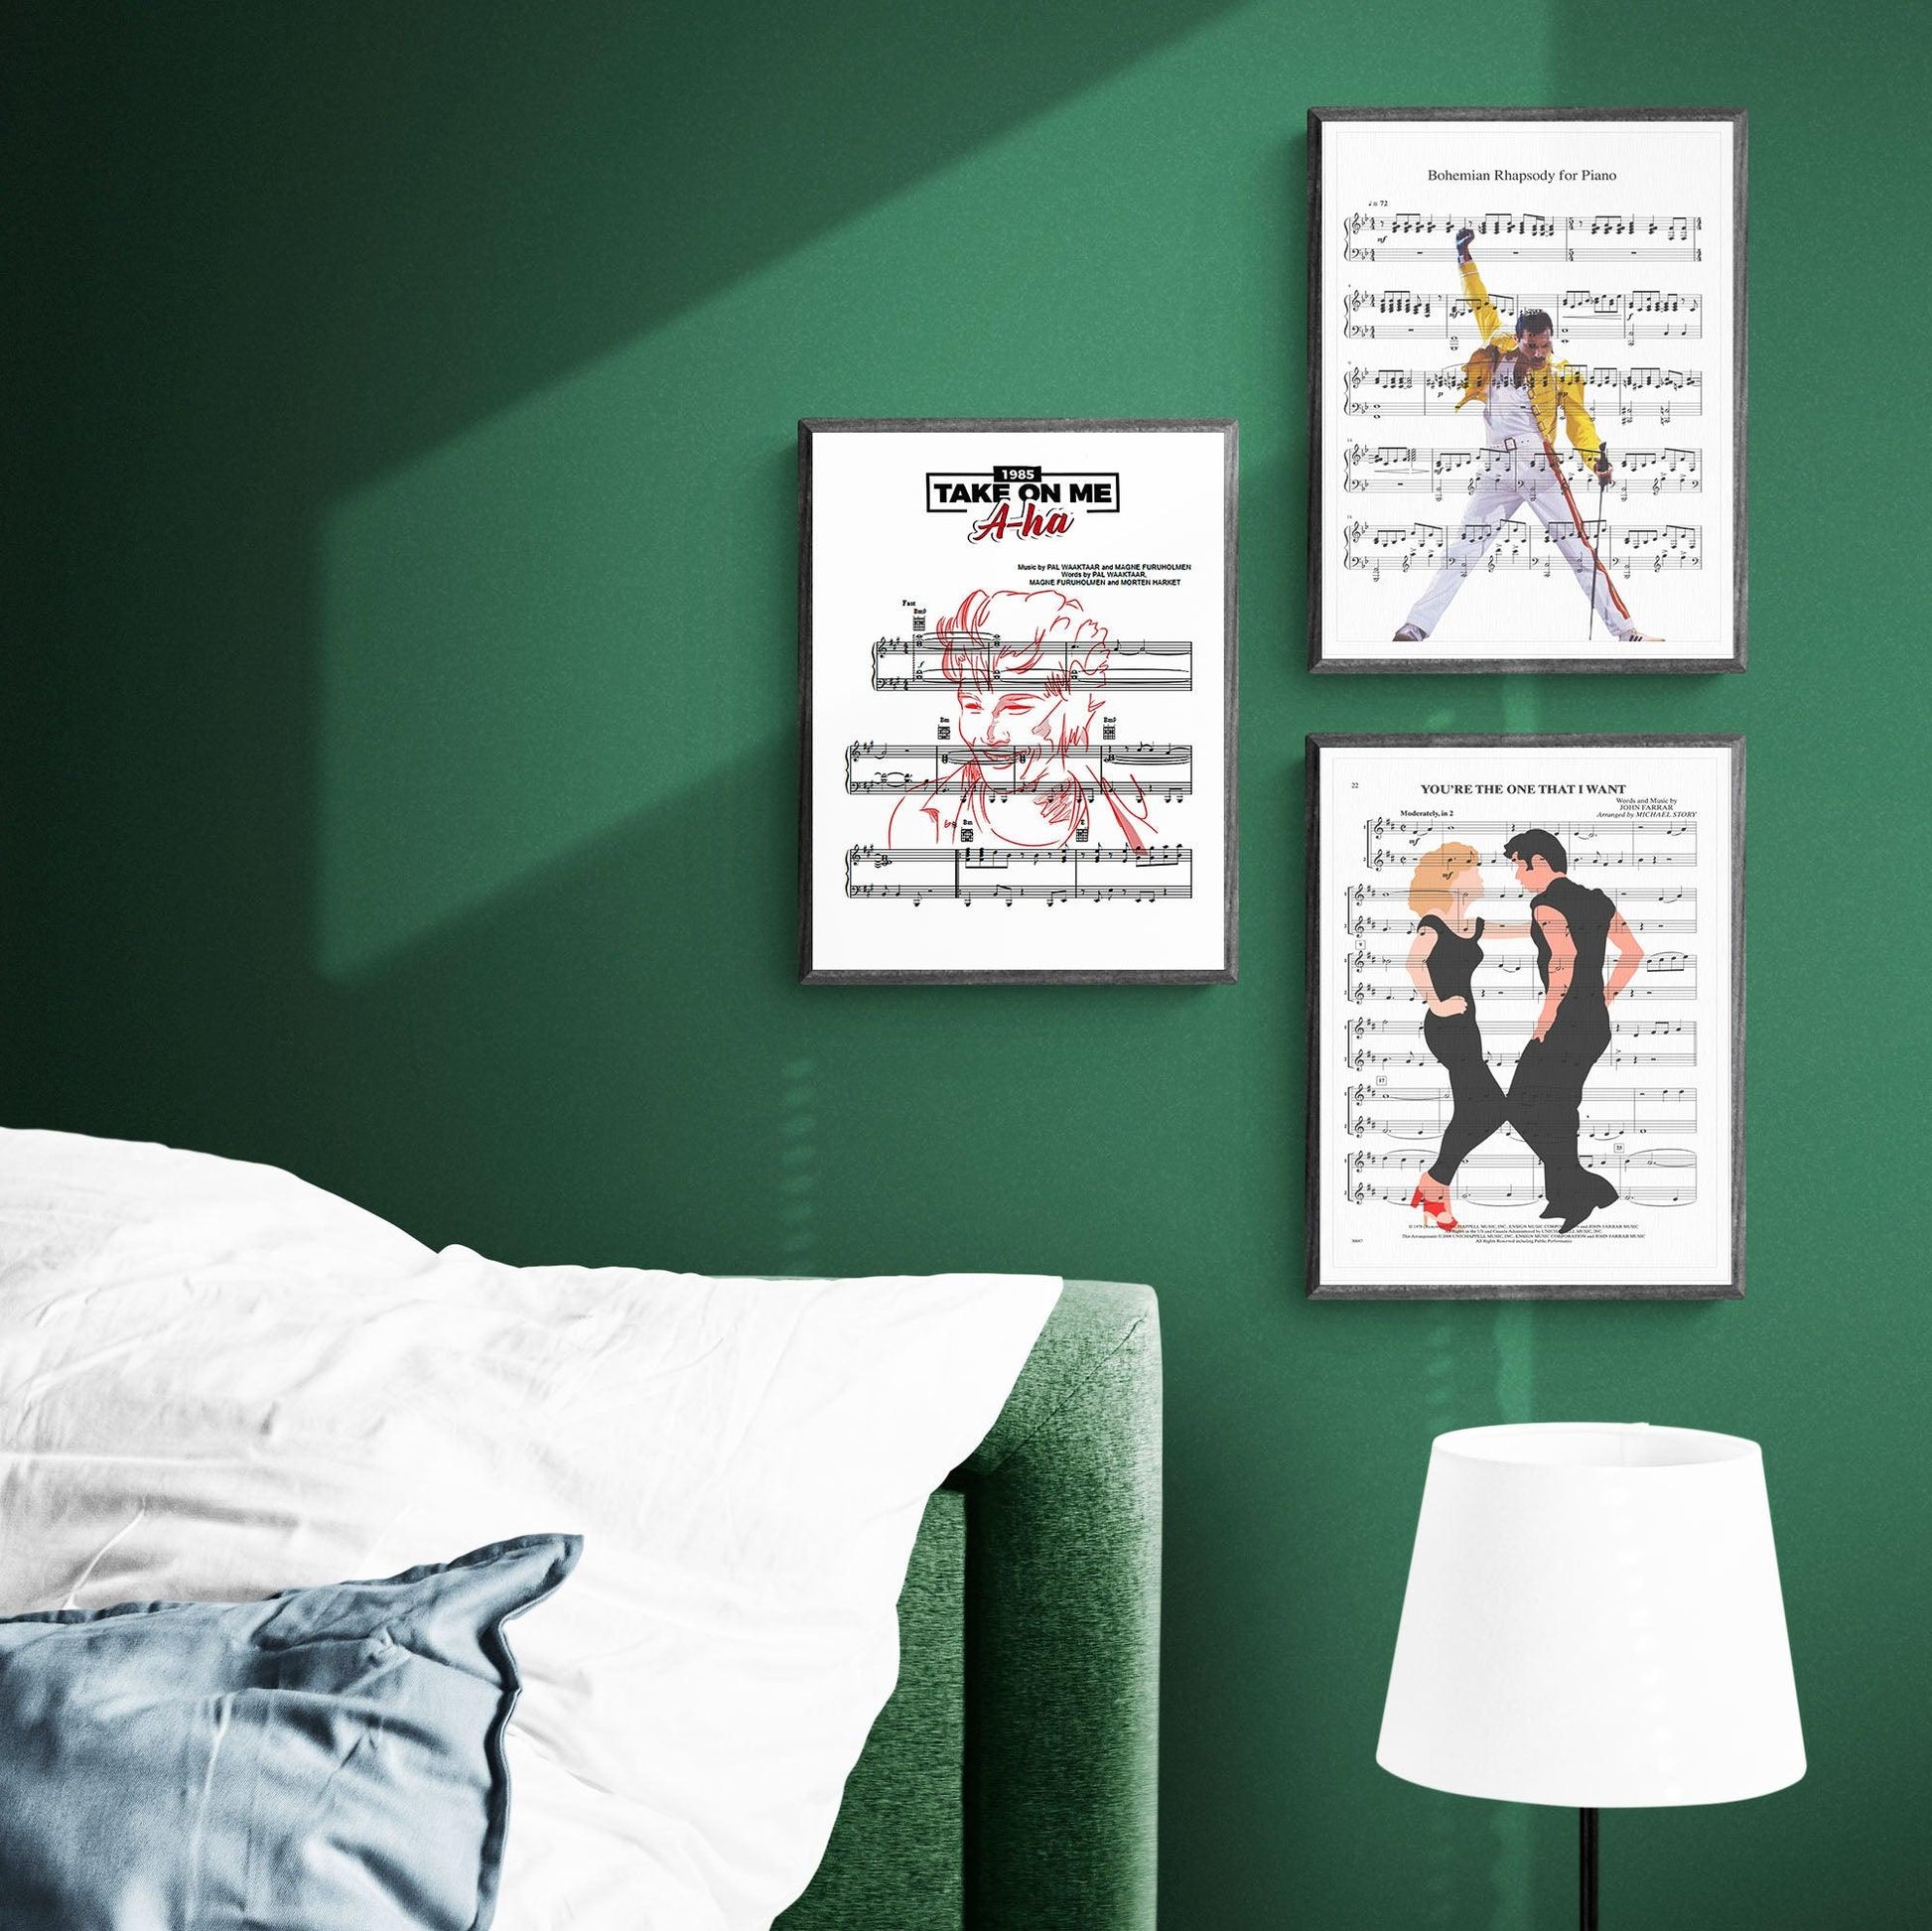 A-ha Take on me Print | Song Music Sheet Notes Print Everyone has a favorite song especially aha Take on me Poster, and now you can show the score as printed staff. The personal favorite song sheet print shows the song chosen as the score. 